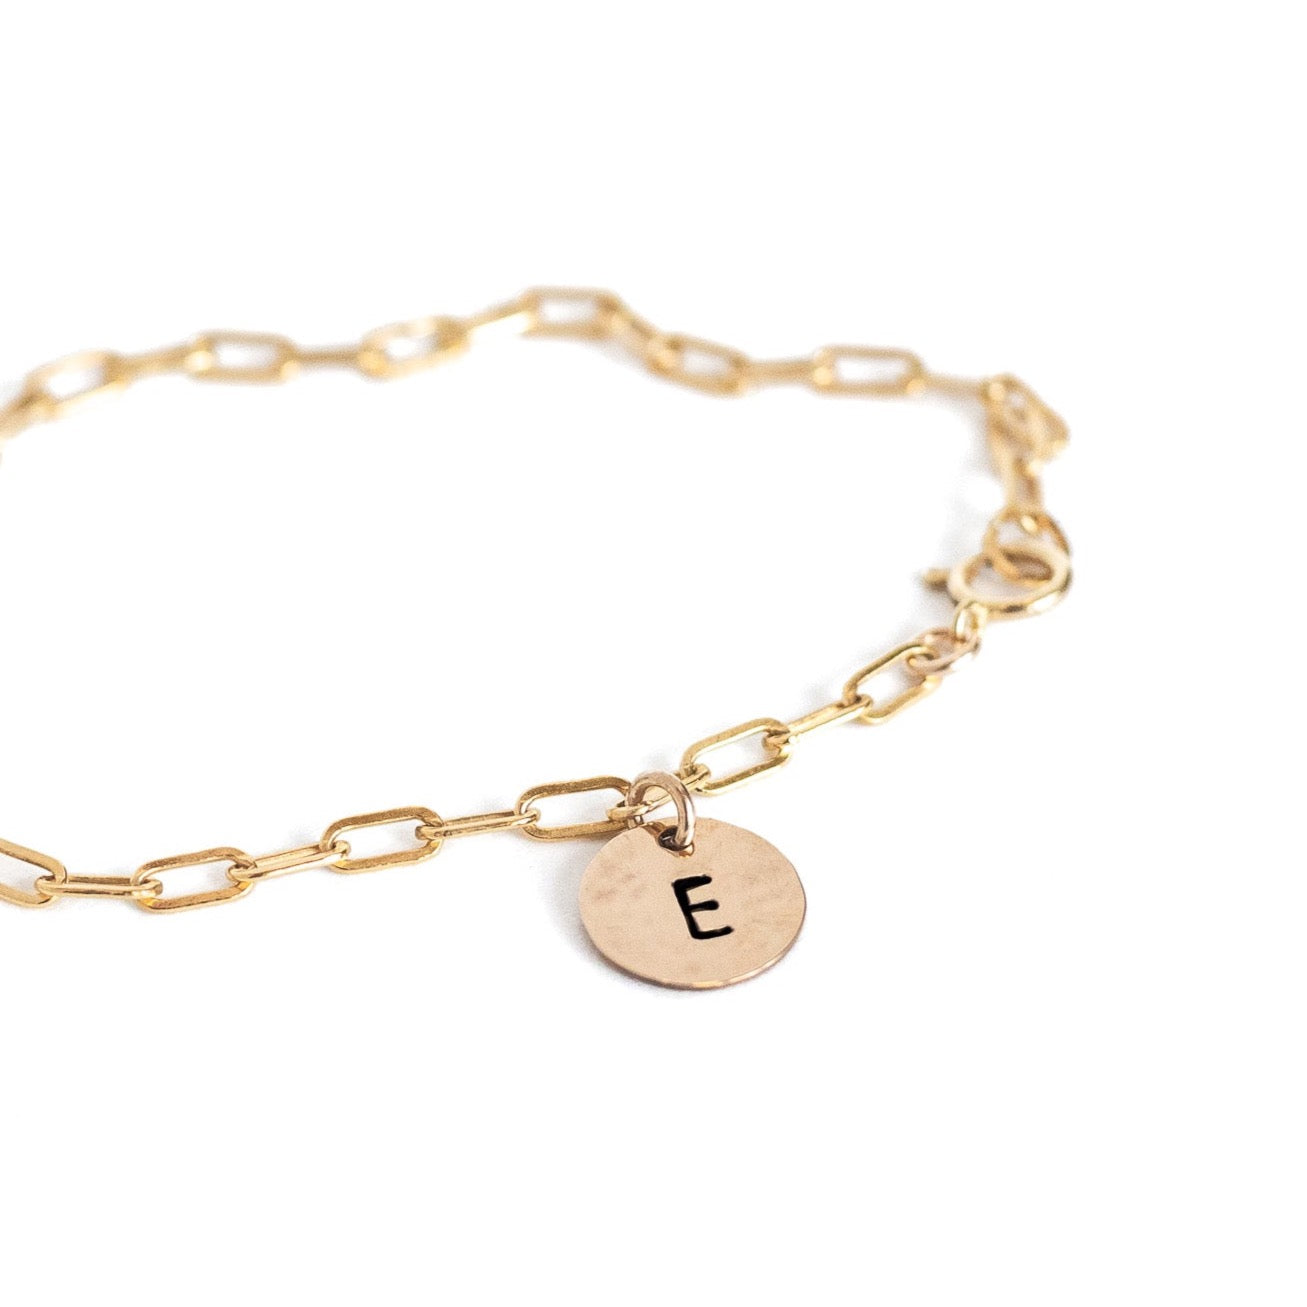 Gold filled paperclip chain bracelet with a small gold filled circle charm with an E stamped on it.